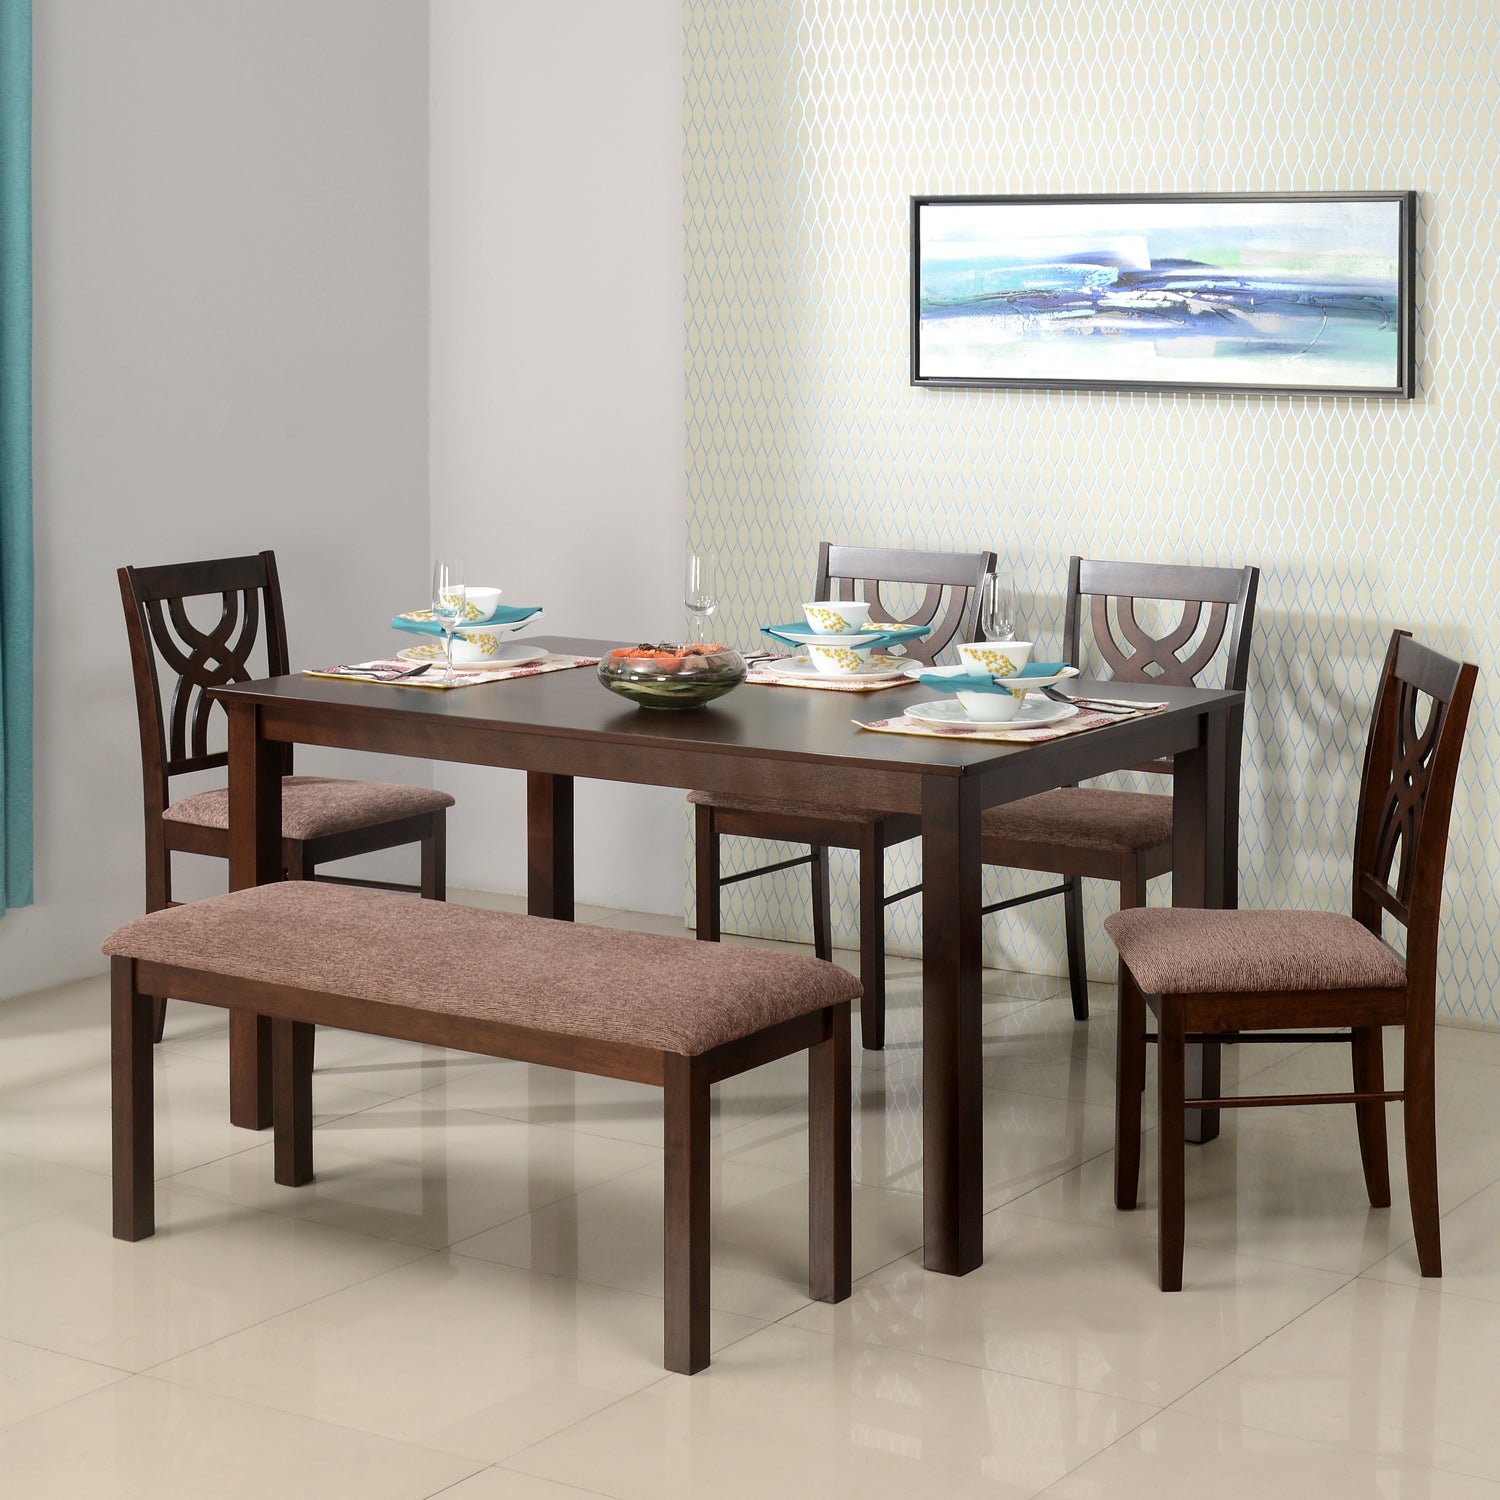 Alice 6 Seater Dining Set With Bench (Brown)